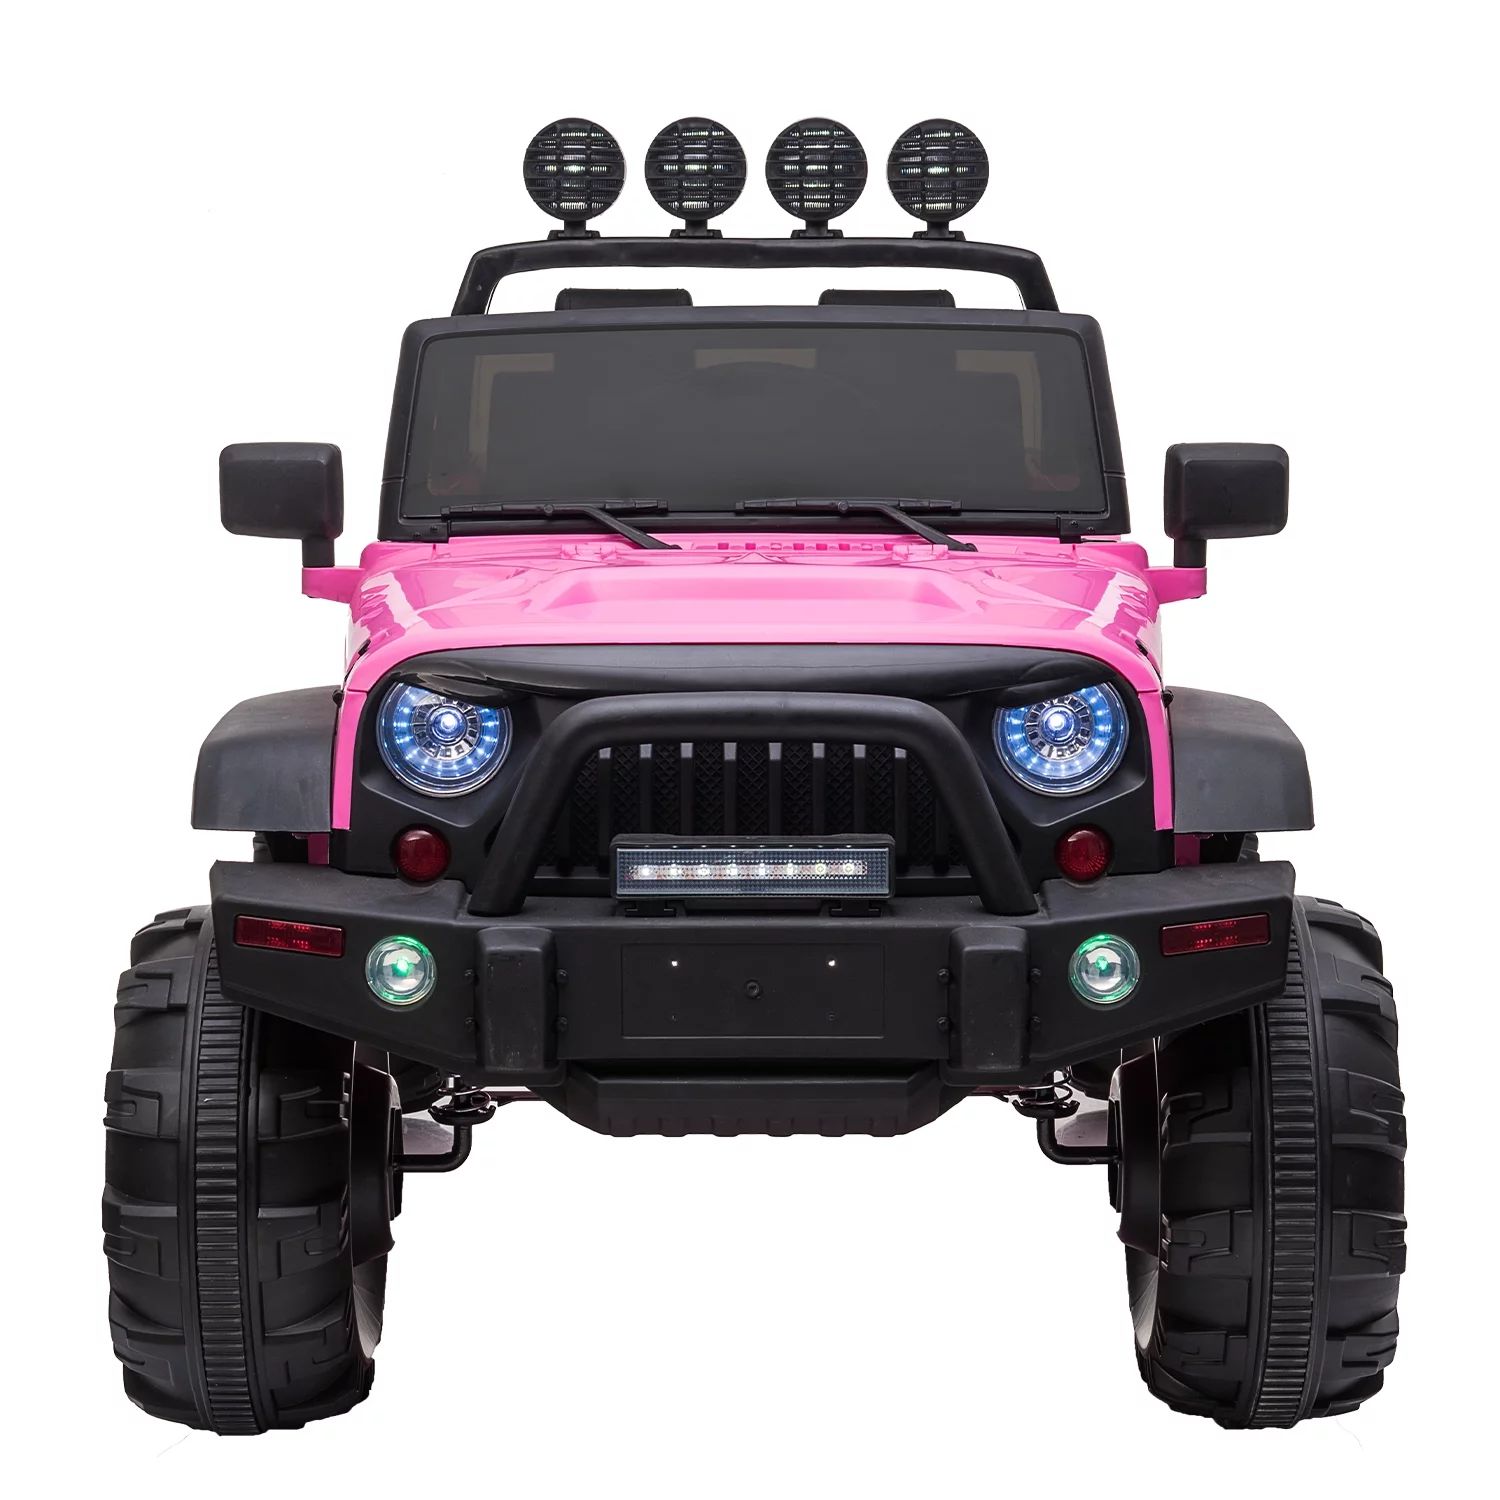 12V Jeep Electric Toy Car, Kids Battery Powered Jeep Truck with Remote Control | Walmart (US)